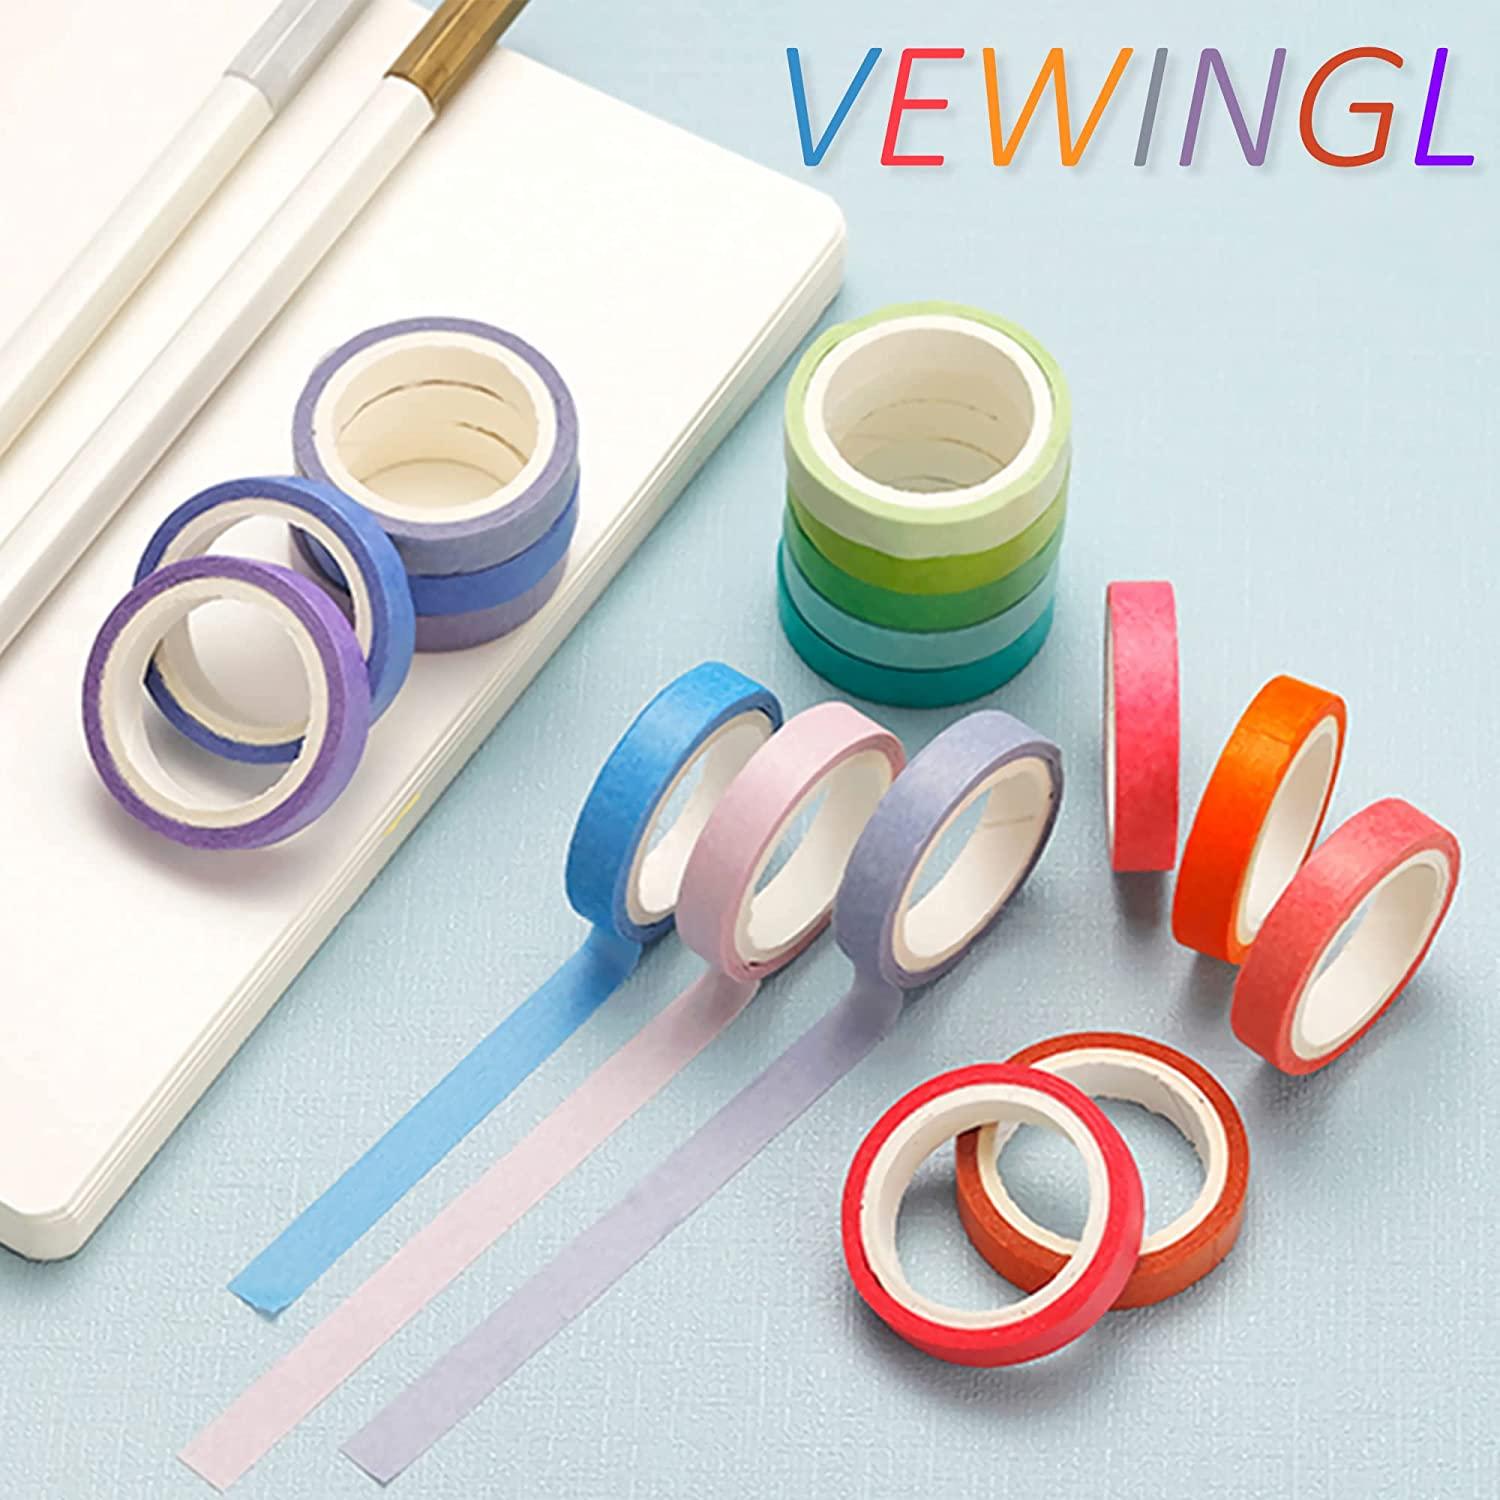 VEWINGL 60 Rolls Washi Tape Set,8 mm Wide Decorative Colored Masking  Tapes,Aesthetic for Scrapbooking,DIY Arts and Crafts, Bullet Journal 60  colors